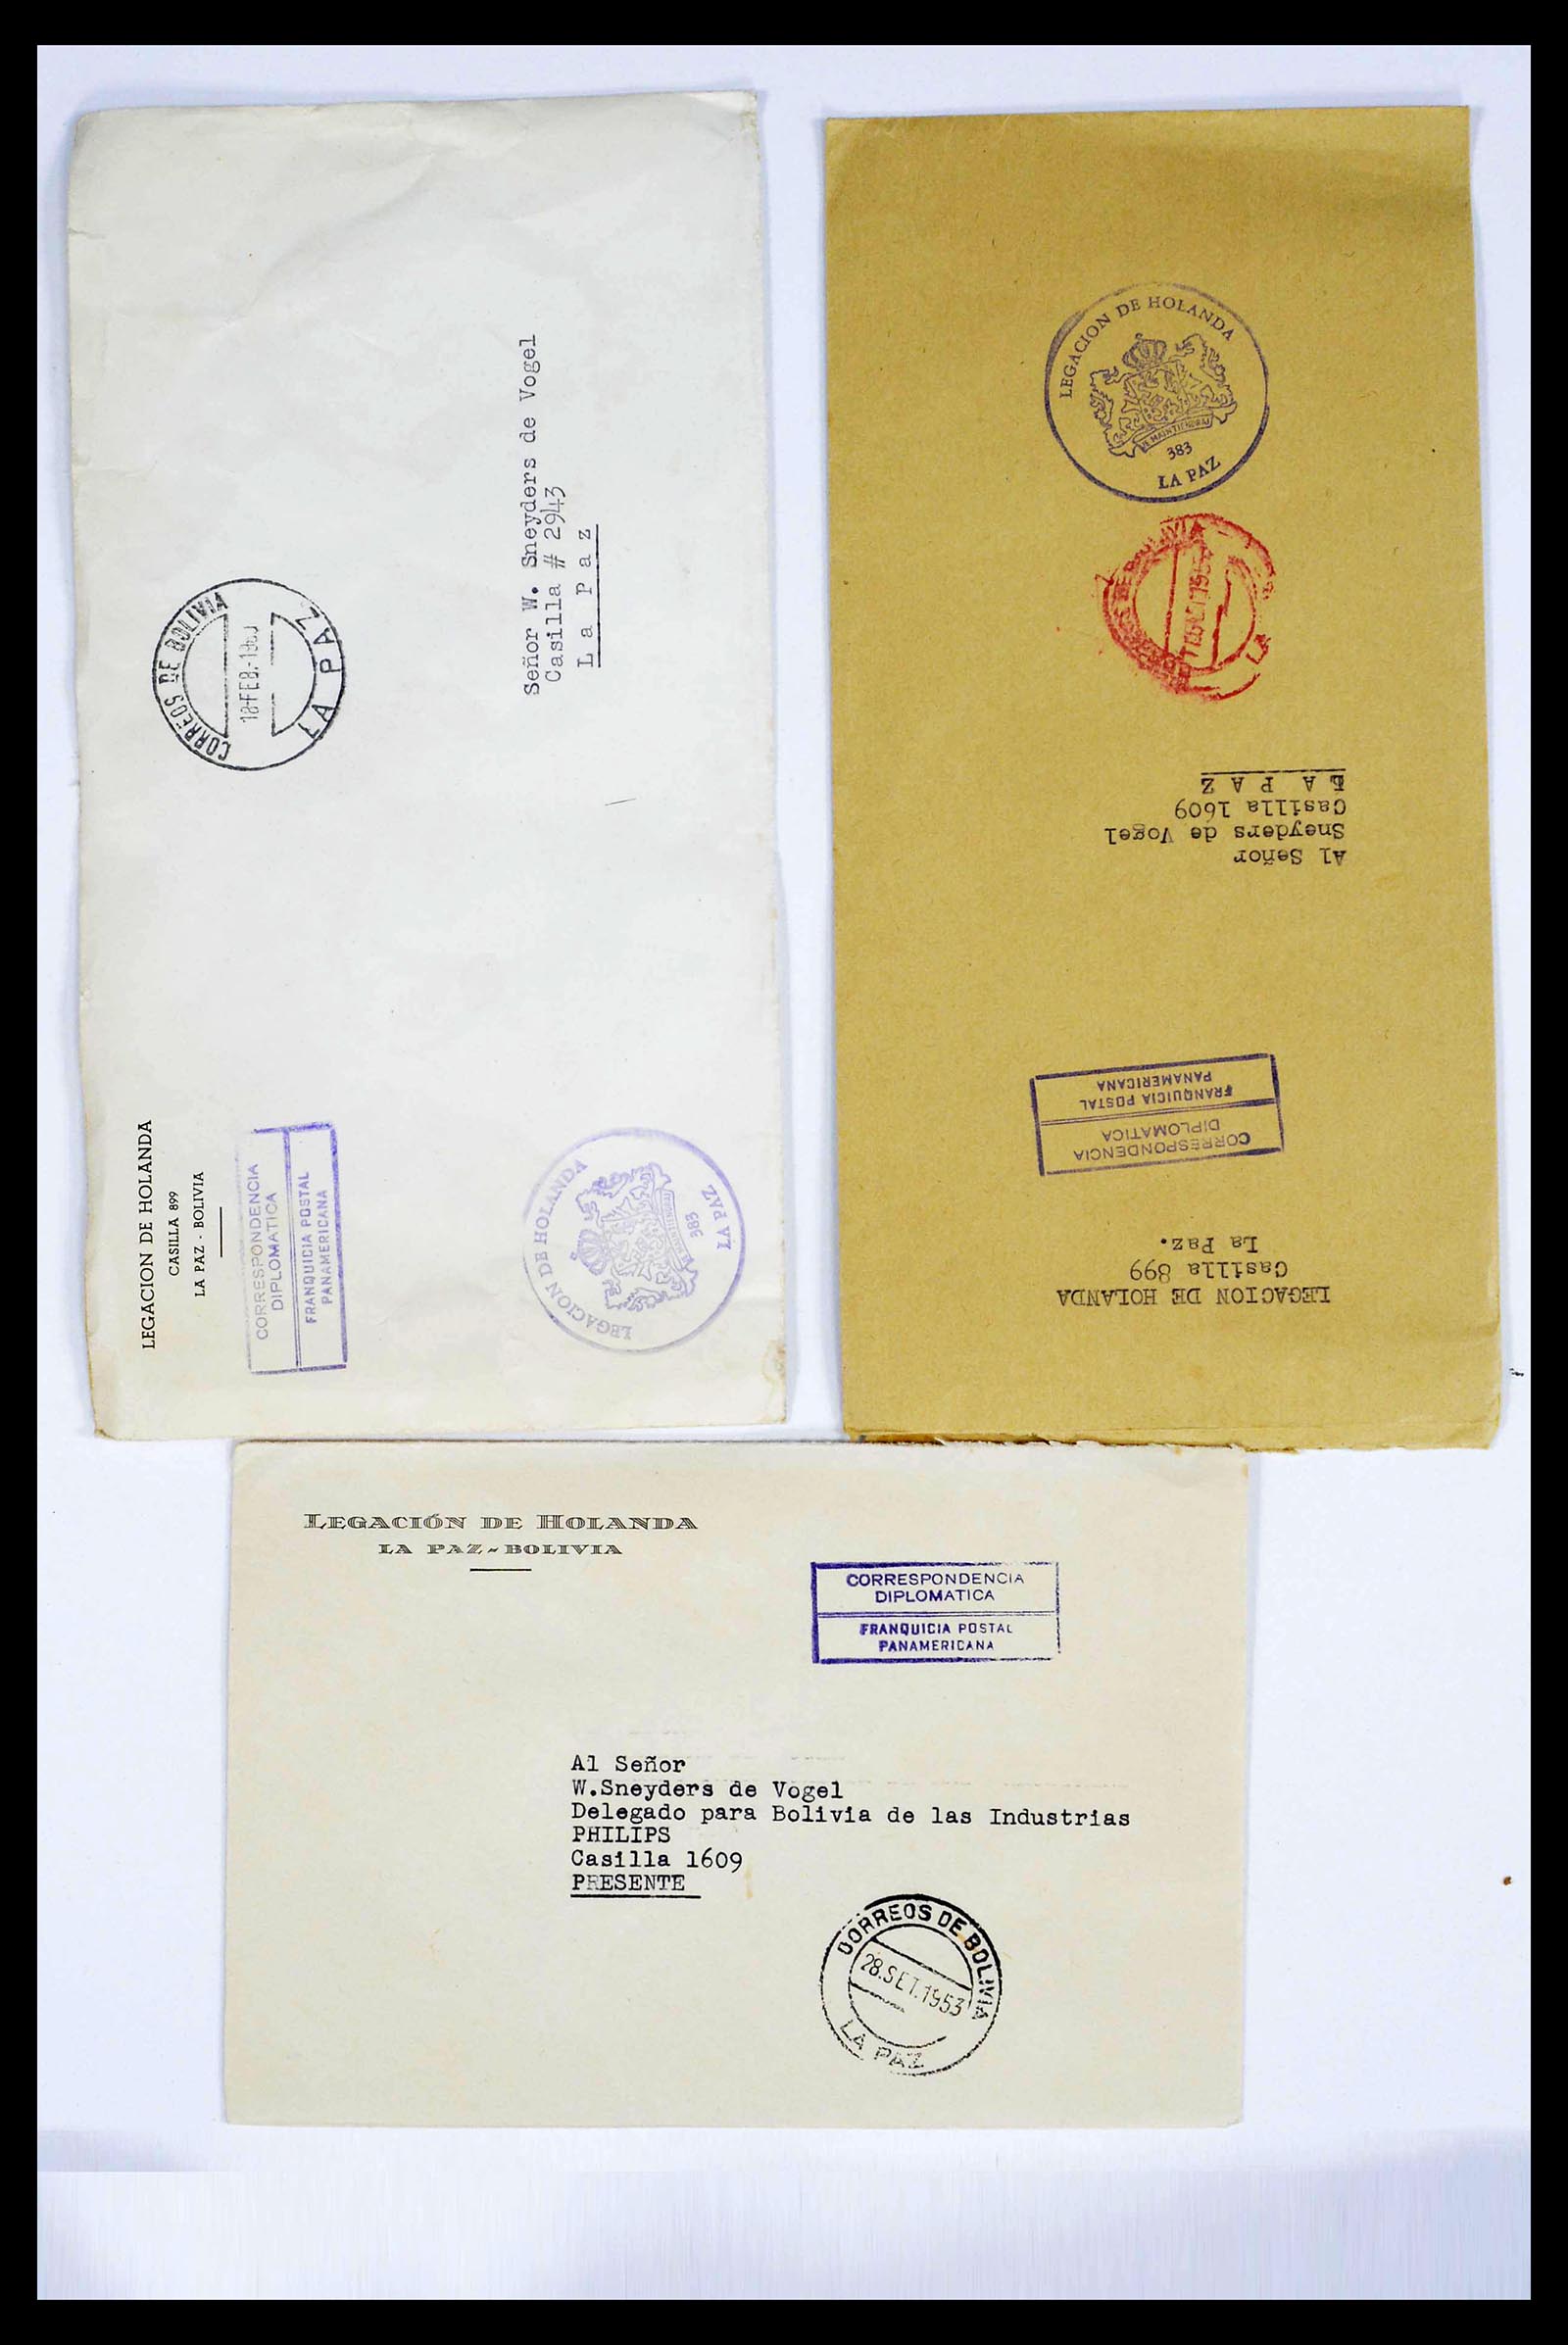 39271 0001 - Stamp collection 39271 Bolivia covers 1950-1980.